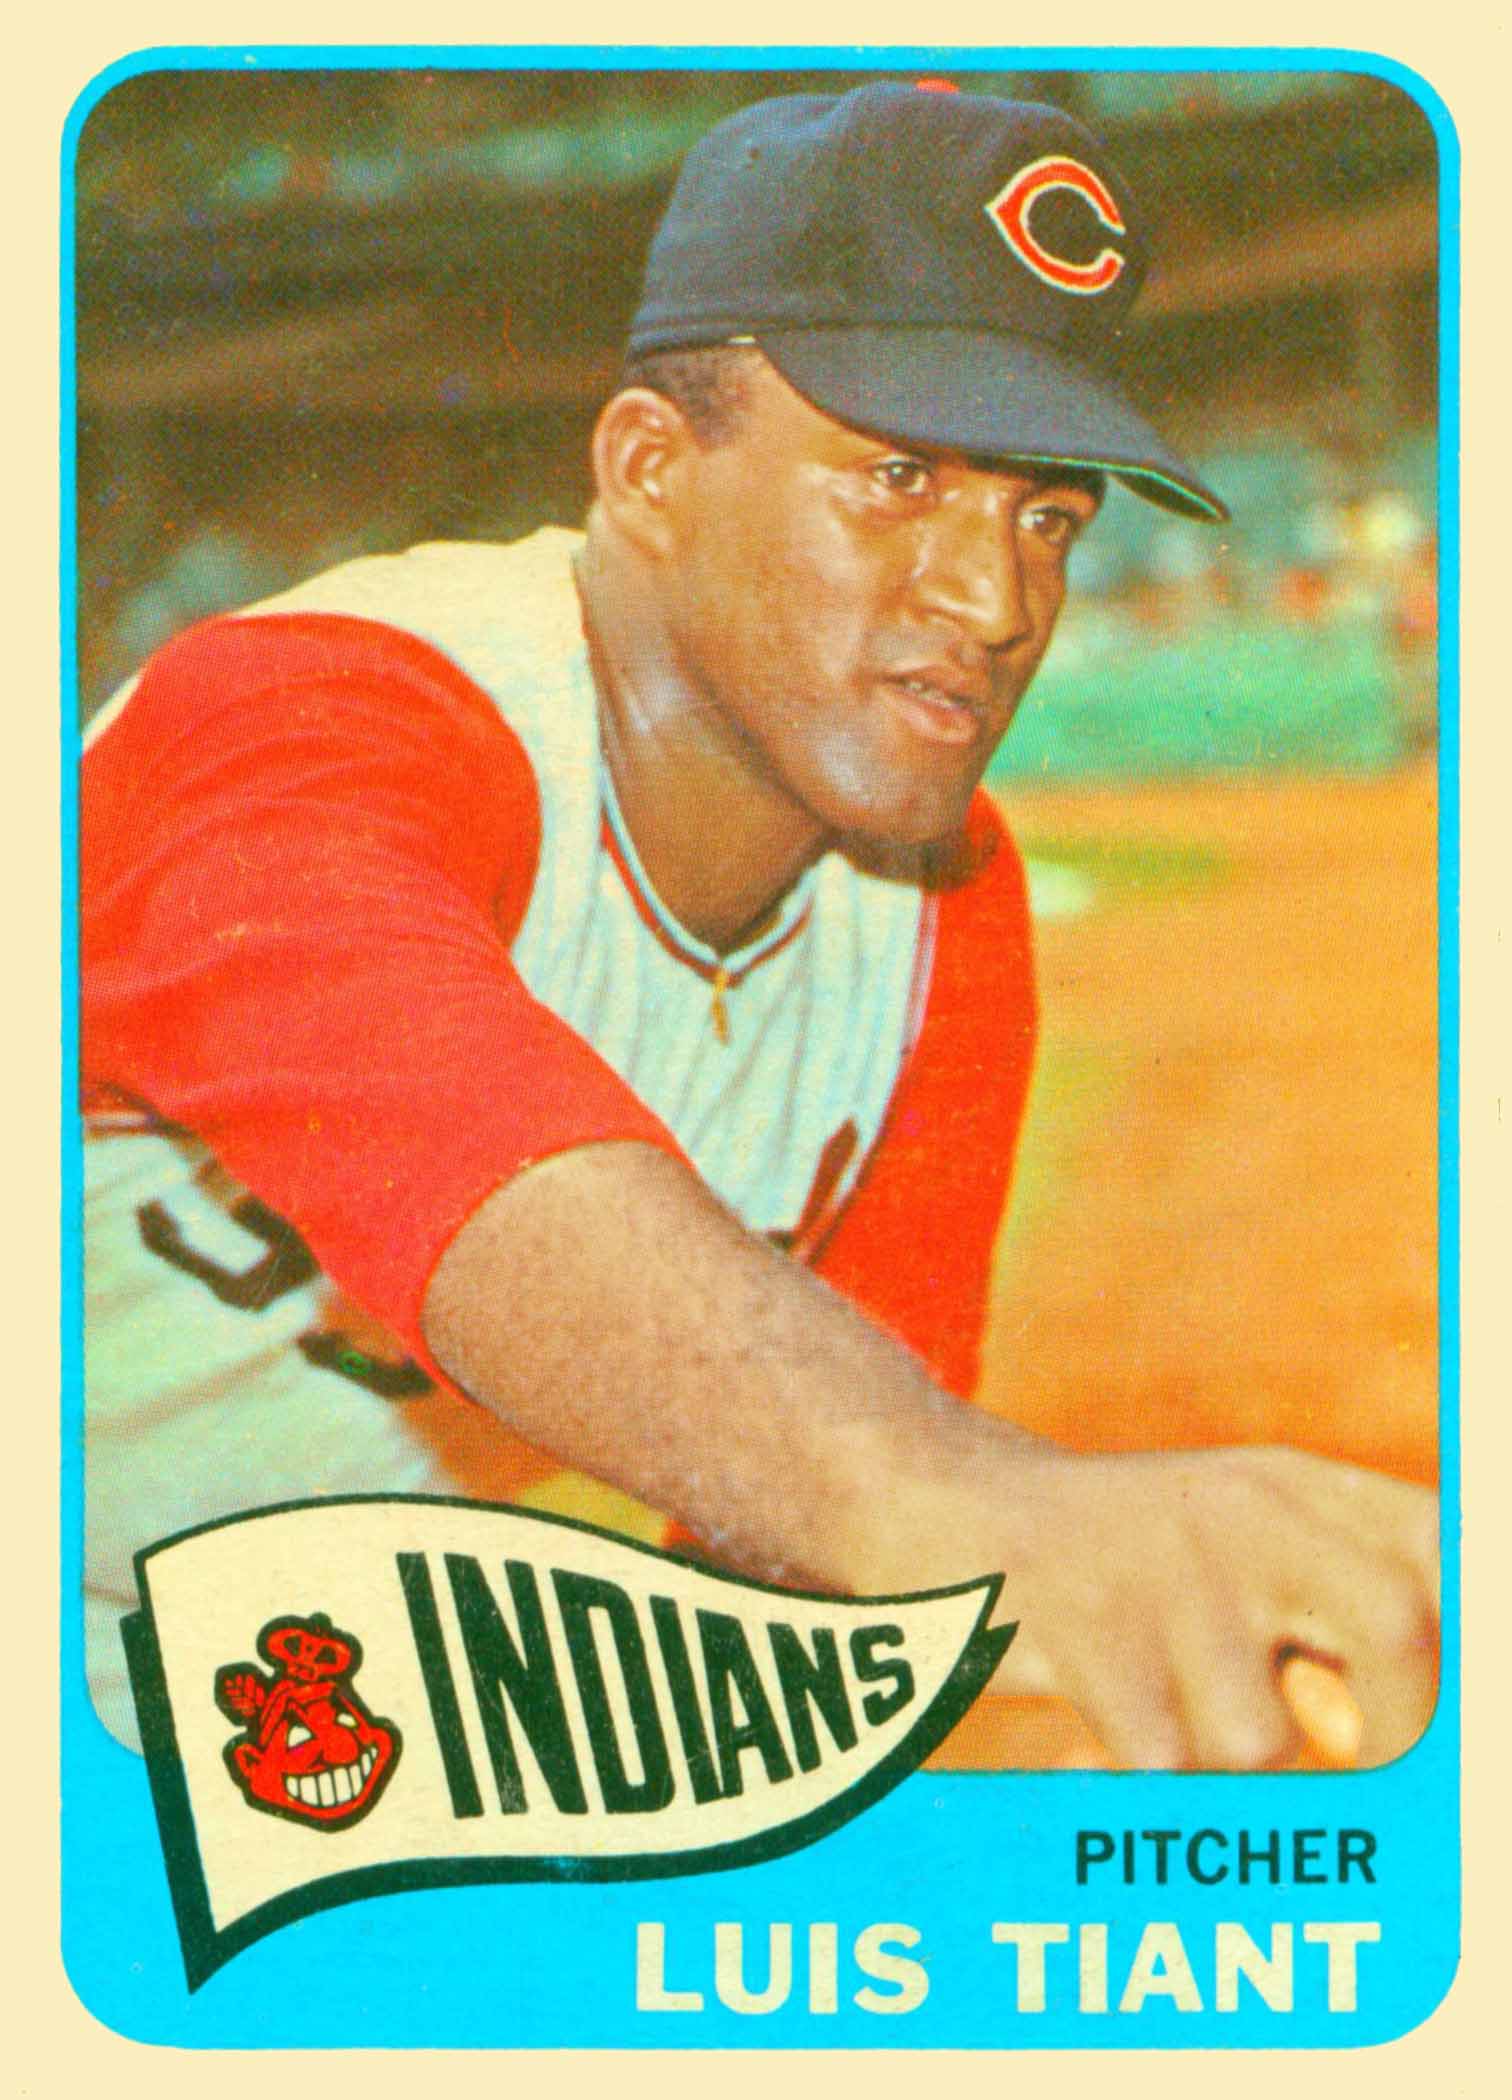 1968 Topps #532 Luis Tiant Indians 7 - NM B68T 08 9510